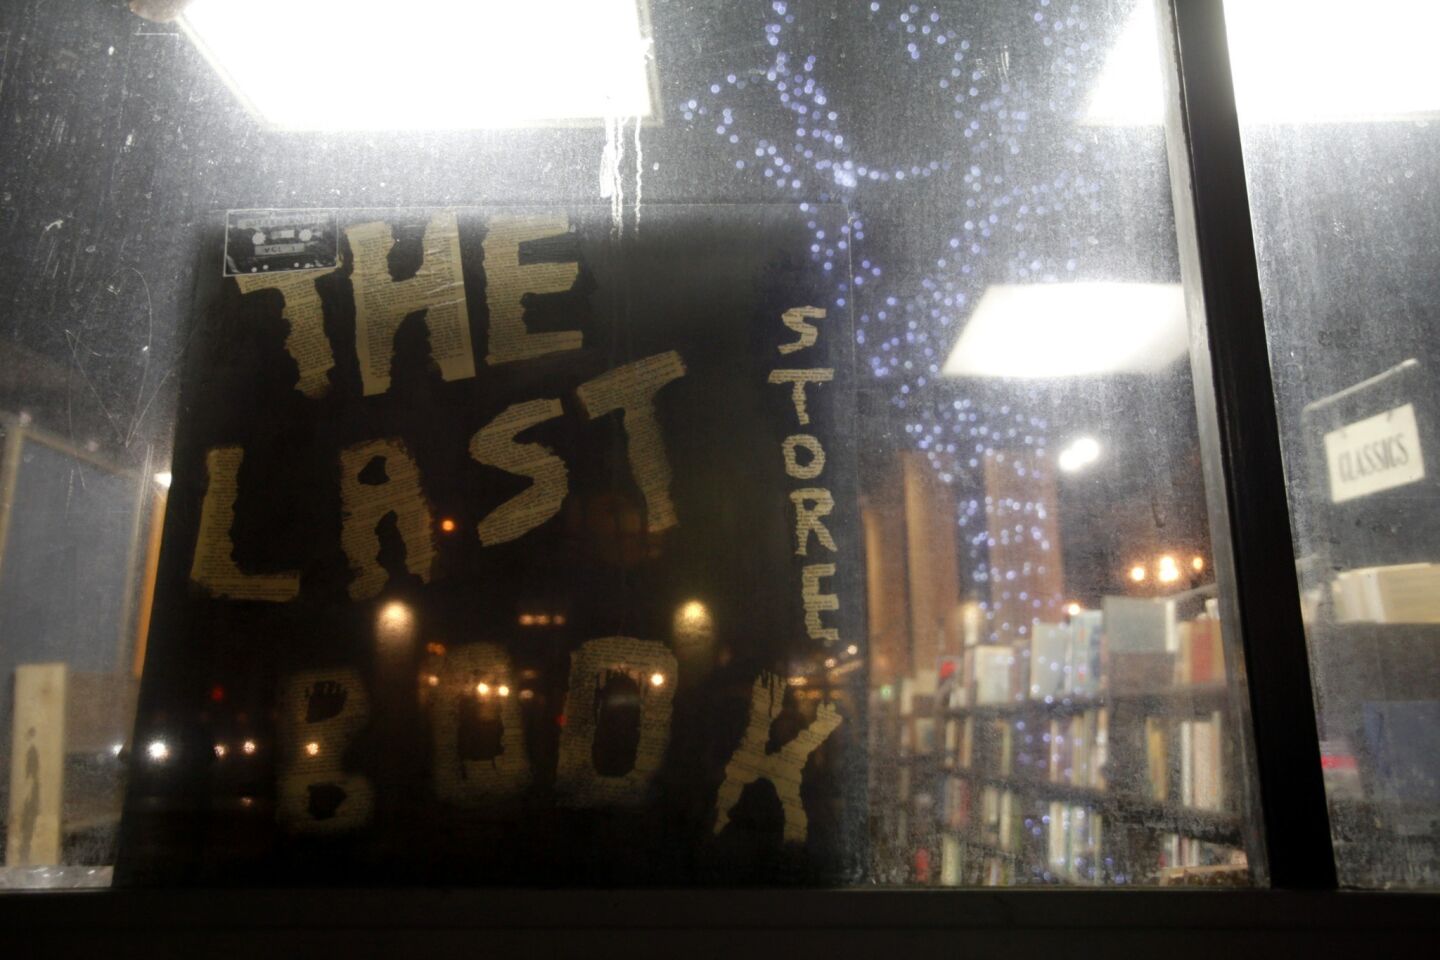 A sign for the Last Bookstore rests in the front window.